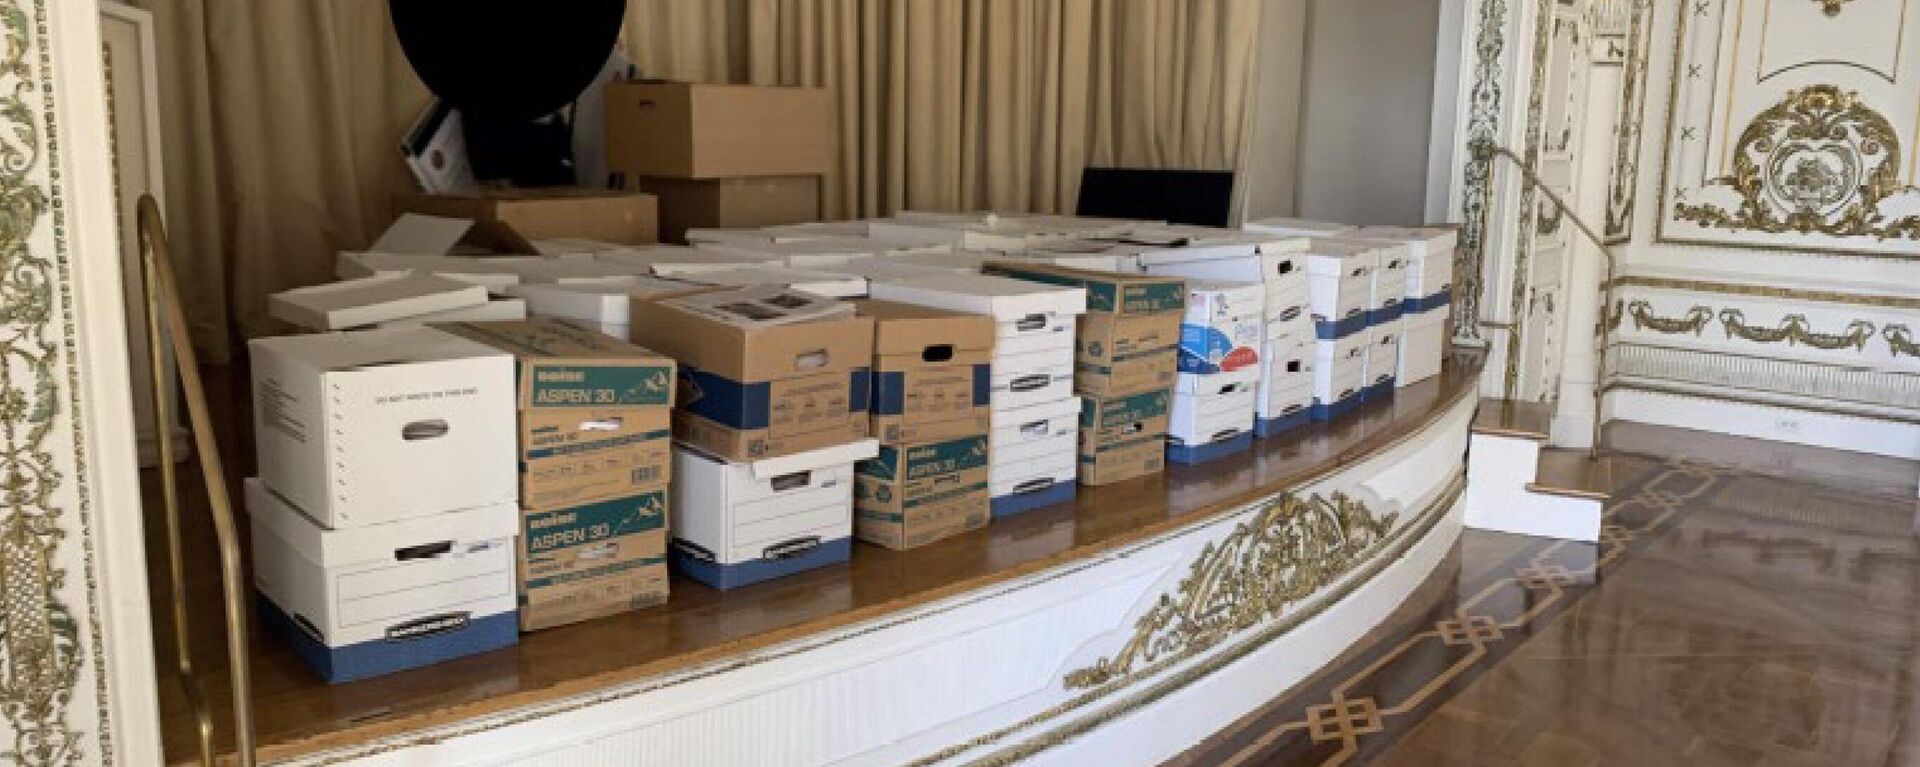 This image, contained in the indictment against former President Donald Trump, shows boxes of records being stored on the stage in the White and Gold Ballroom at Trump's Mar-a-Lago estate in Palm Beach, Fla. Trump is facing 37 felony charges related to the mishandling of classified documents according to an indictment unsealed Friday, June 9, 2023.  - Sputnik International, 1920, 10.06.2023